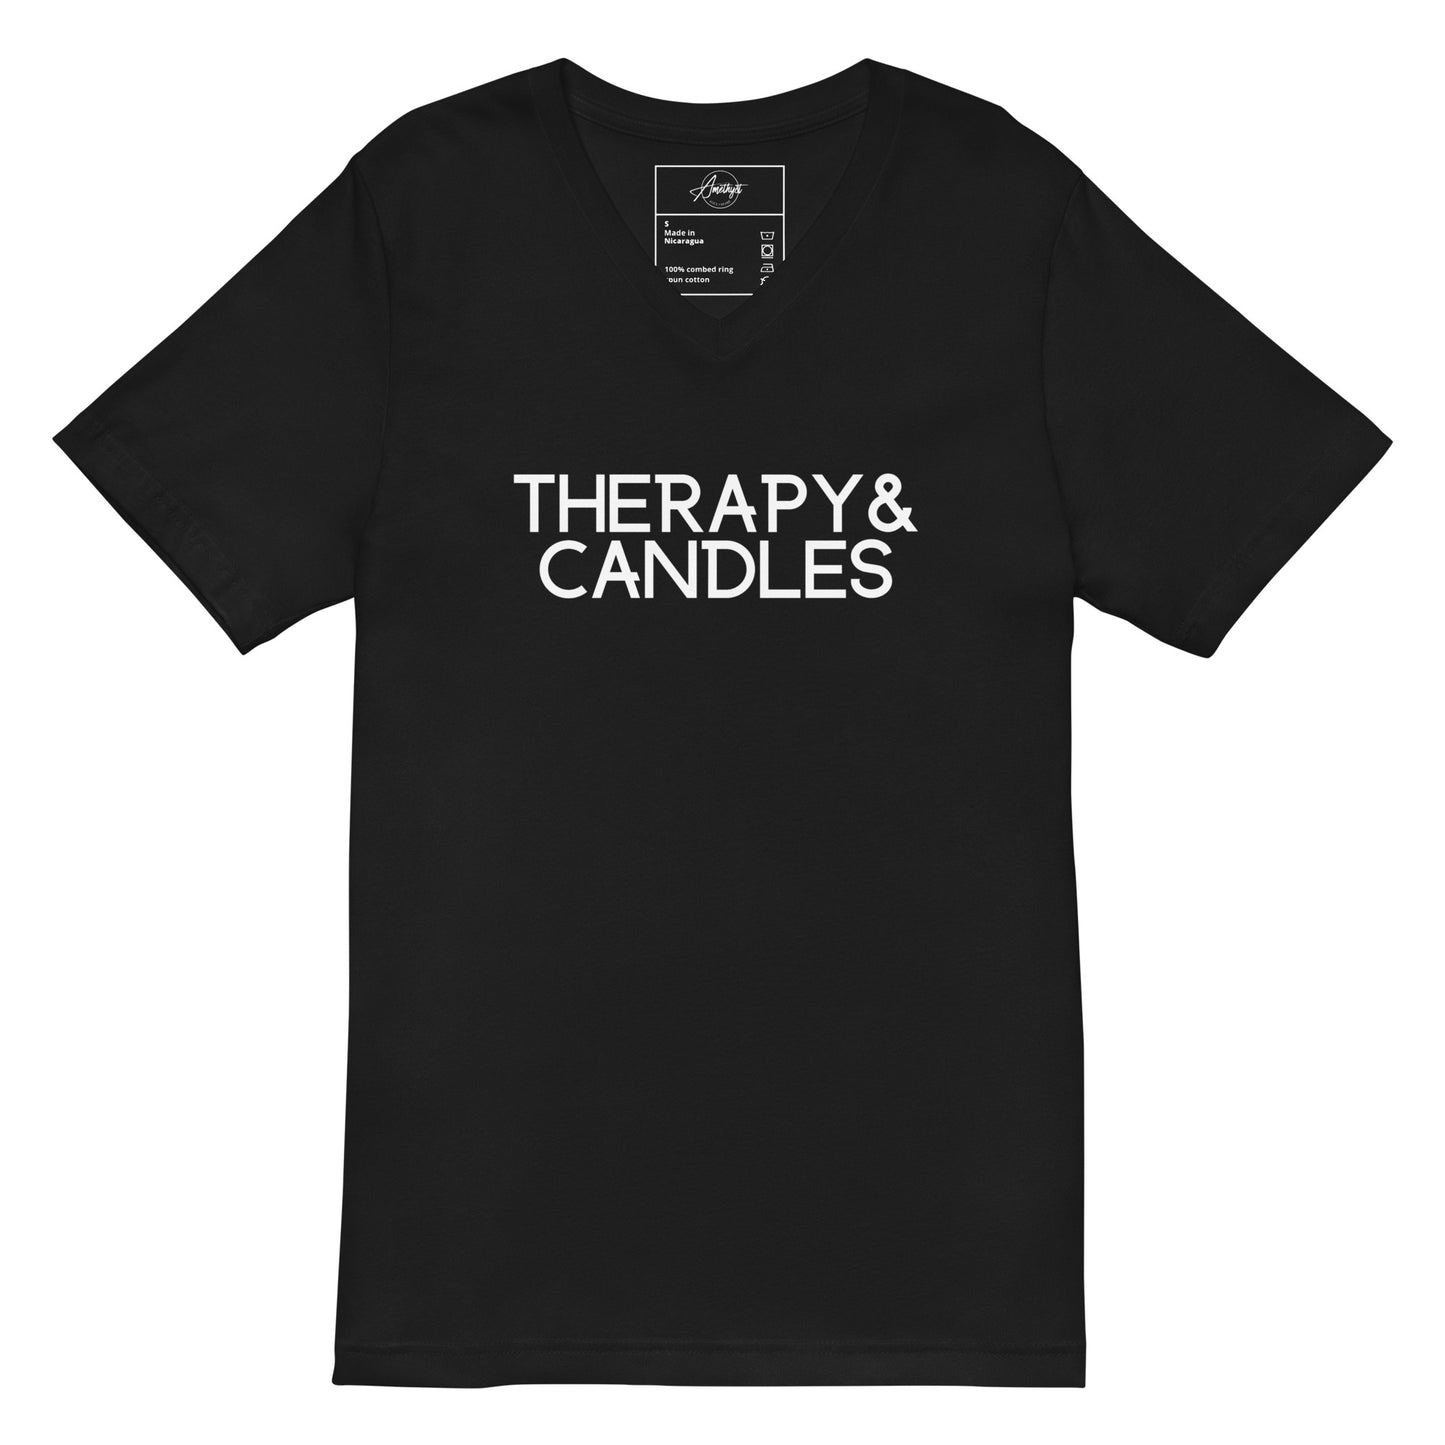 Therapy + Candles Unisex Short Sleeve V-Neck T-Shirt